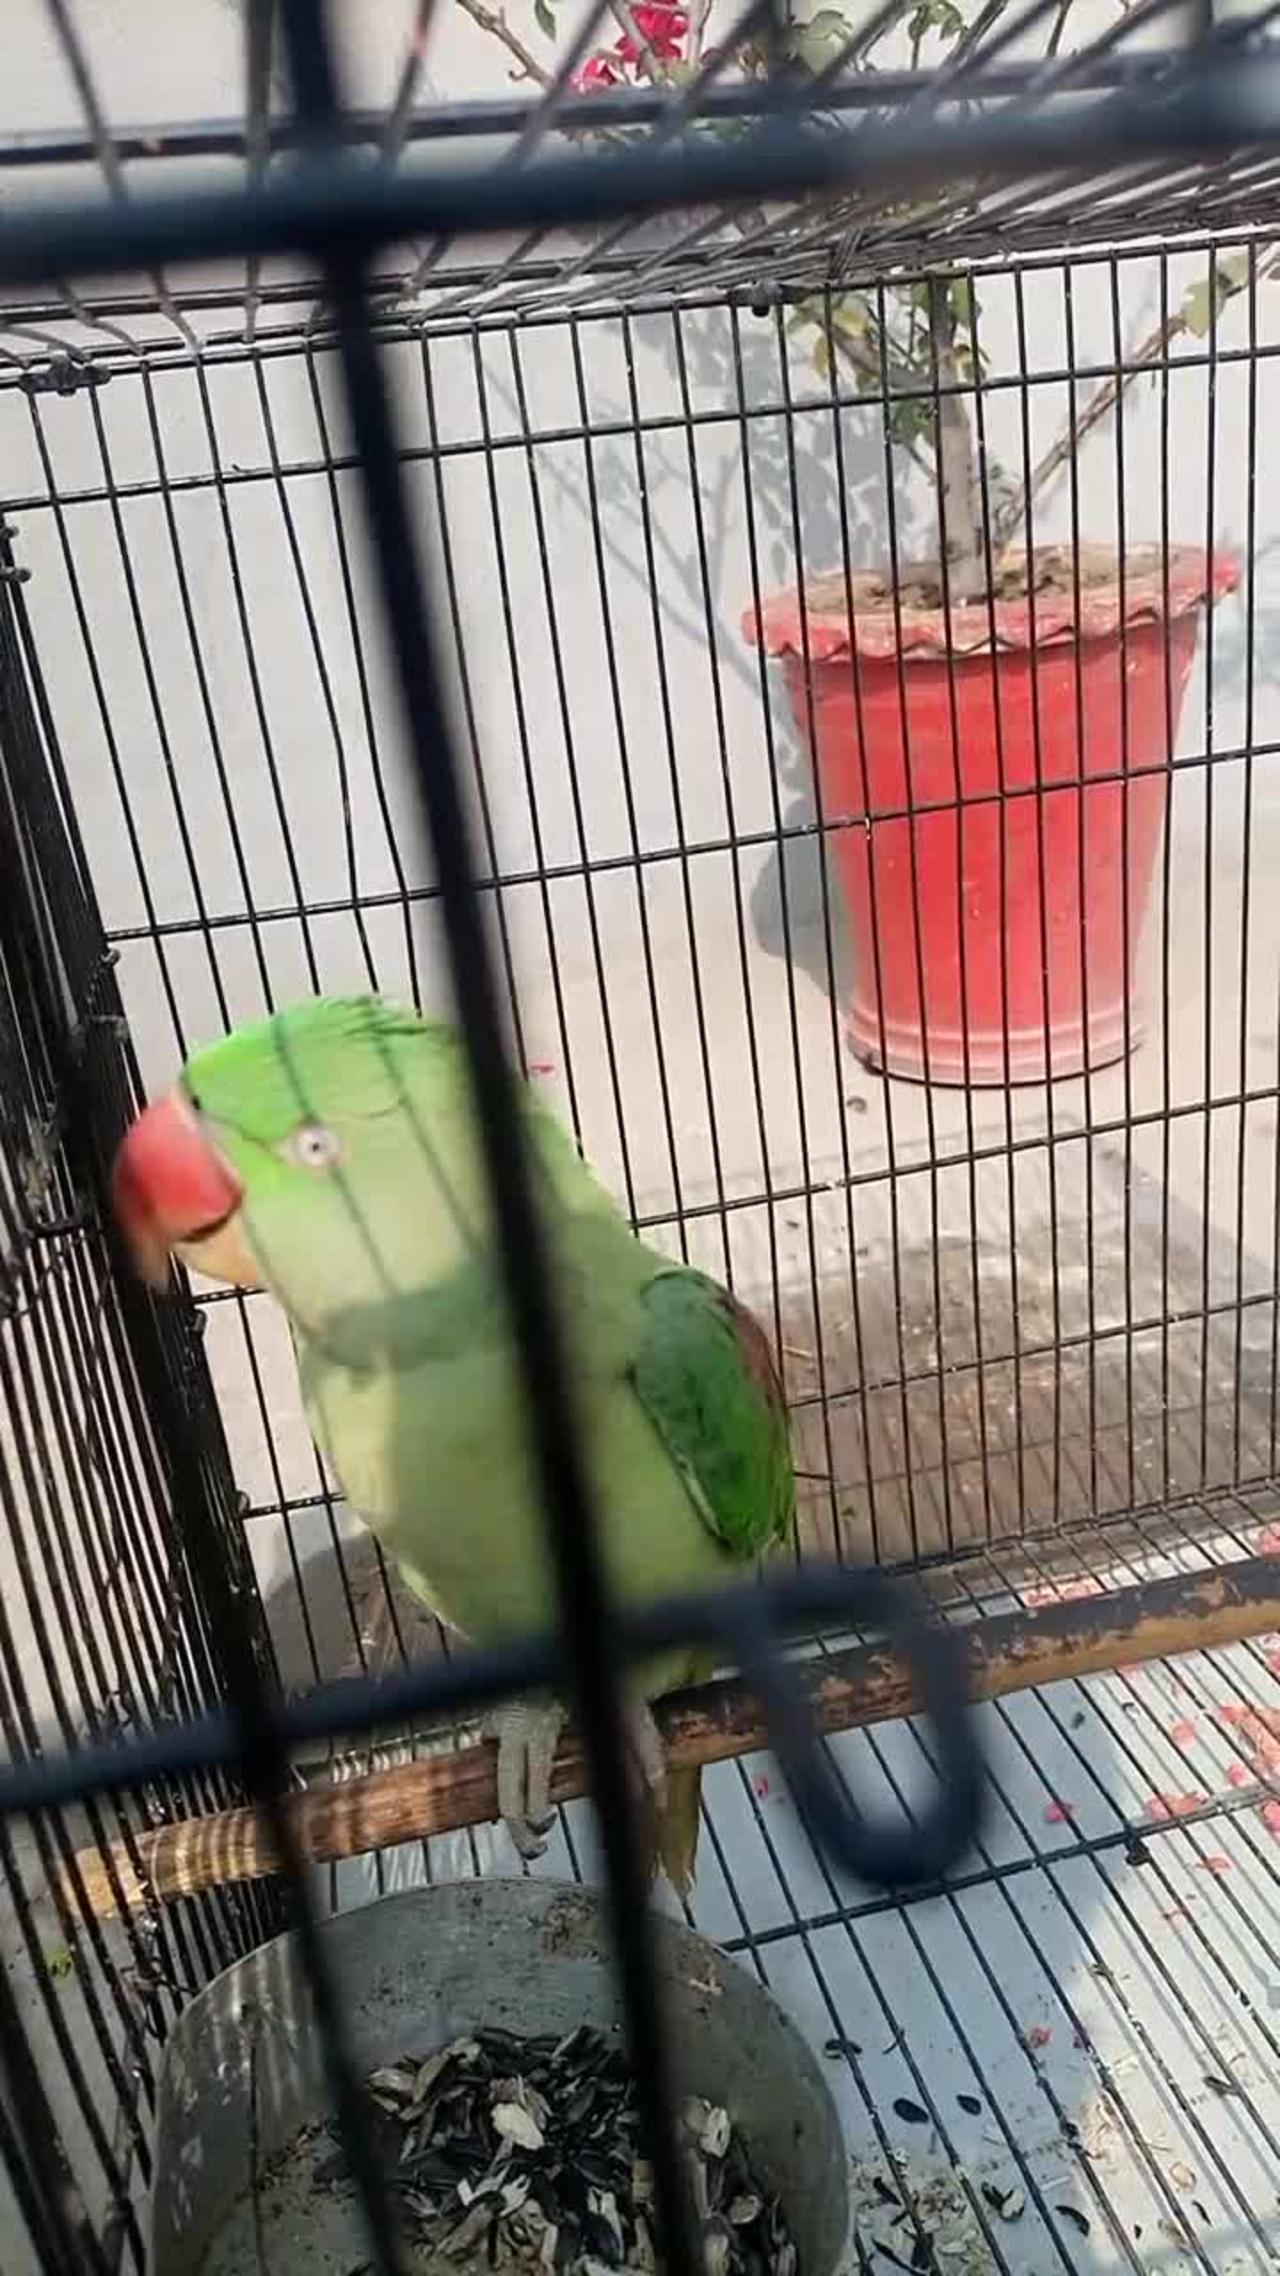 parrot in angry mood